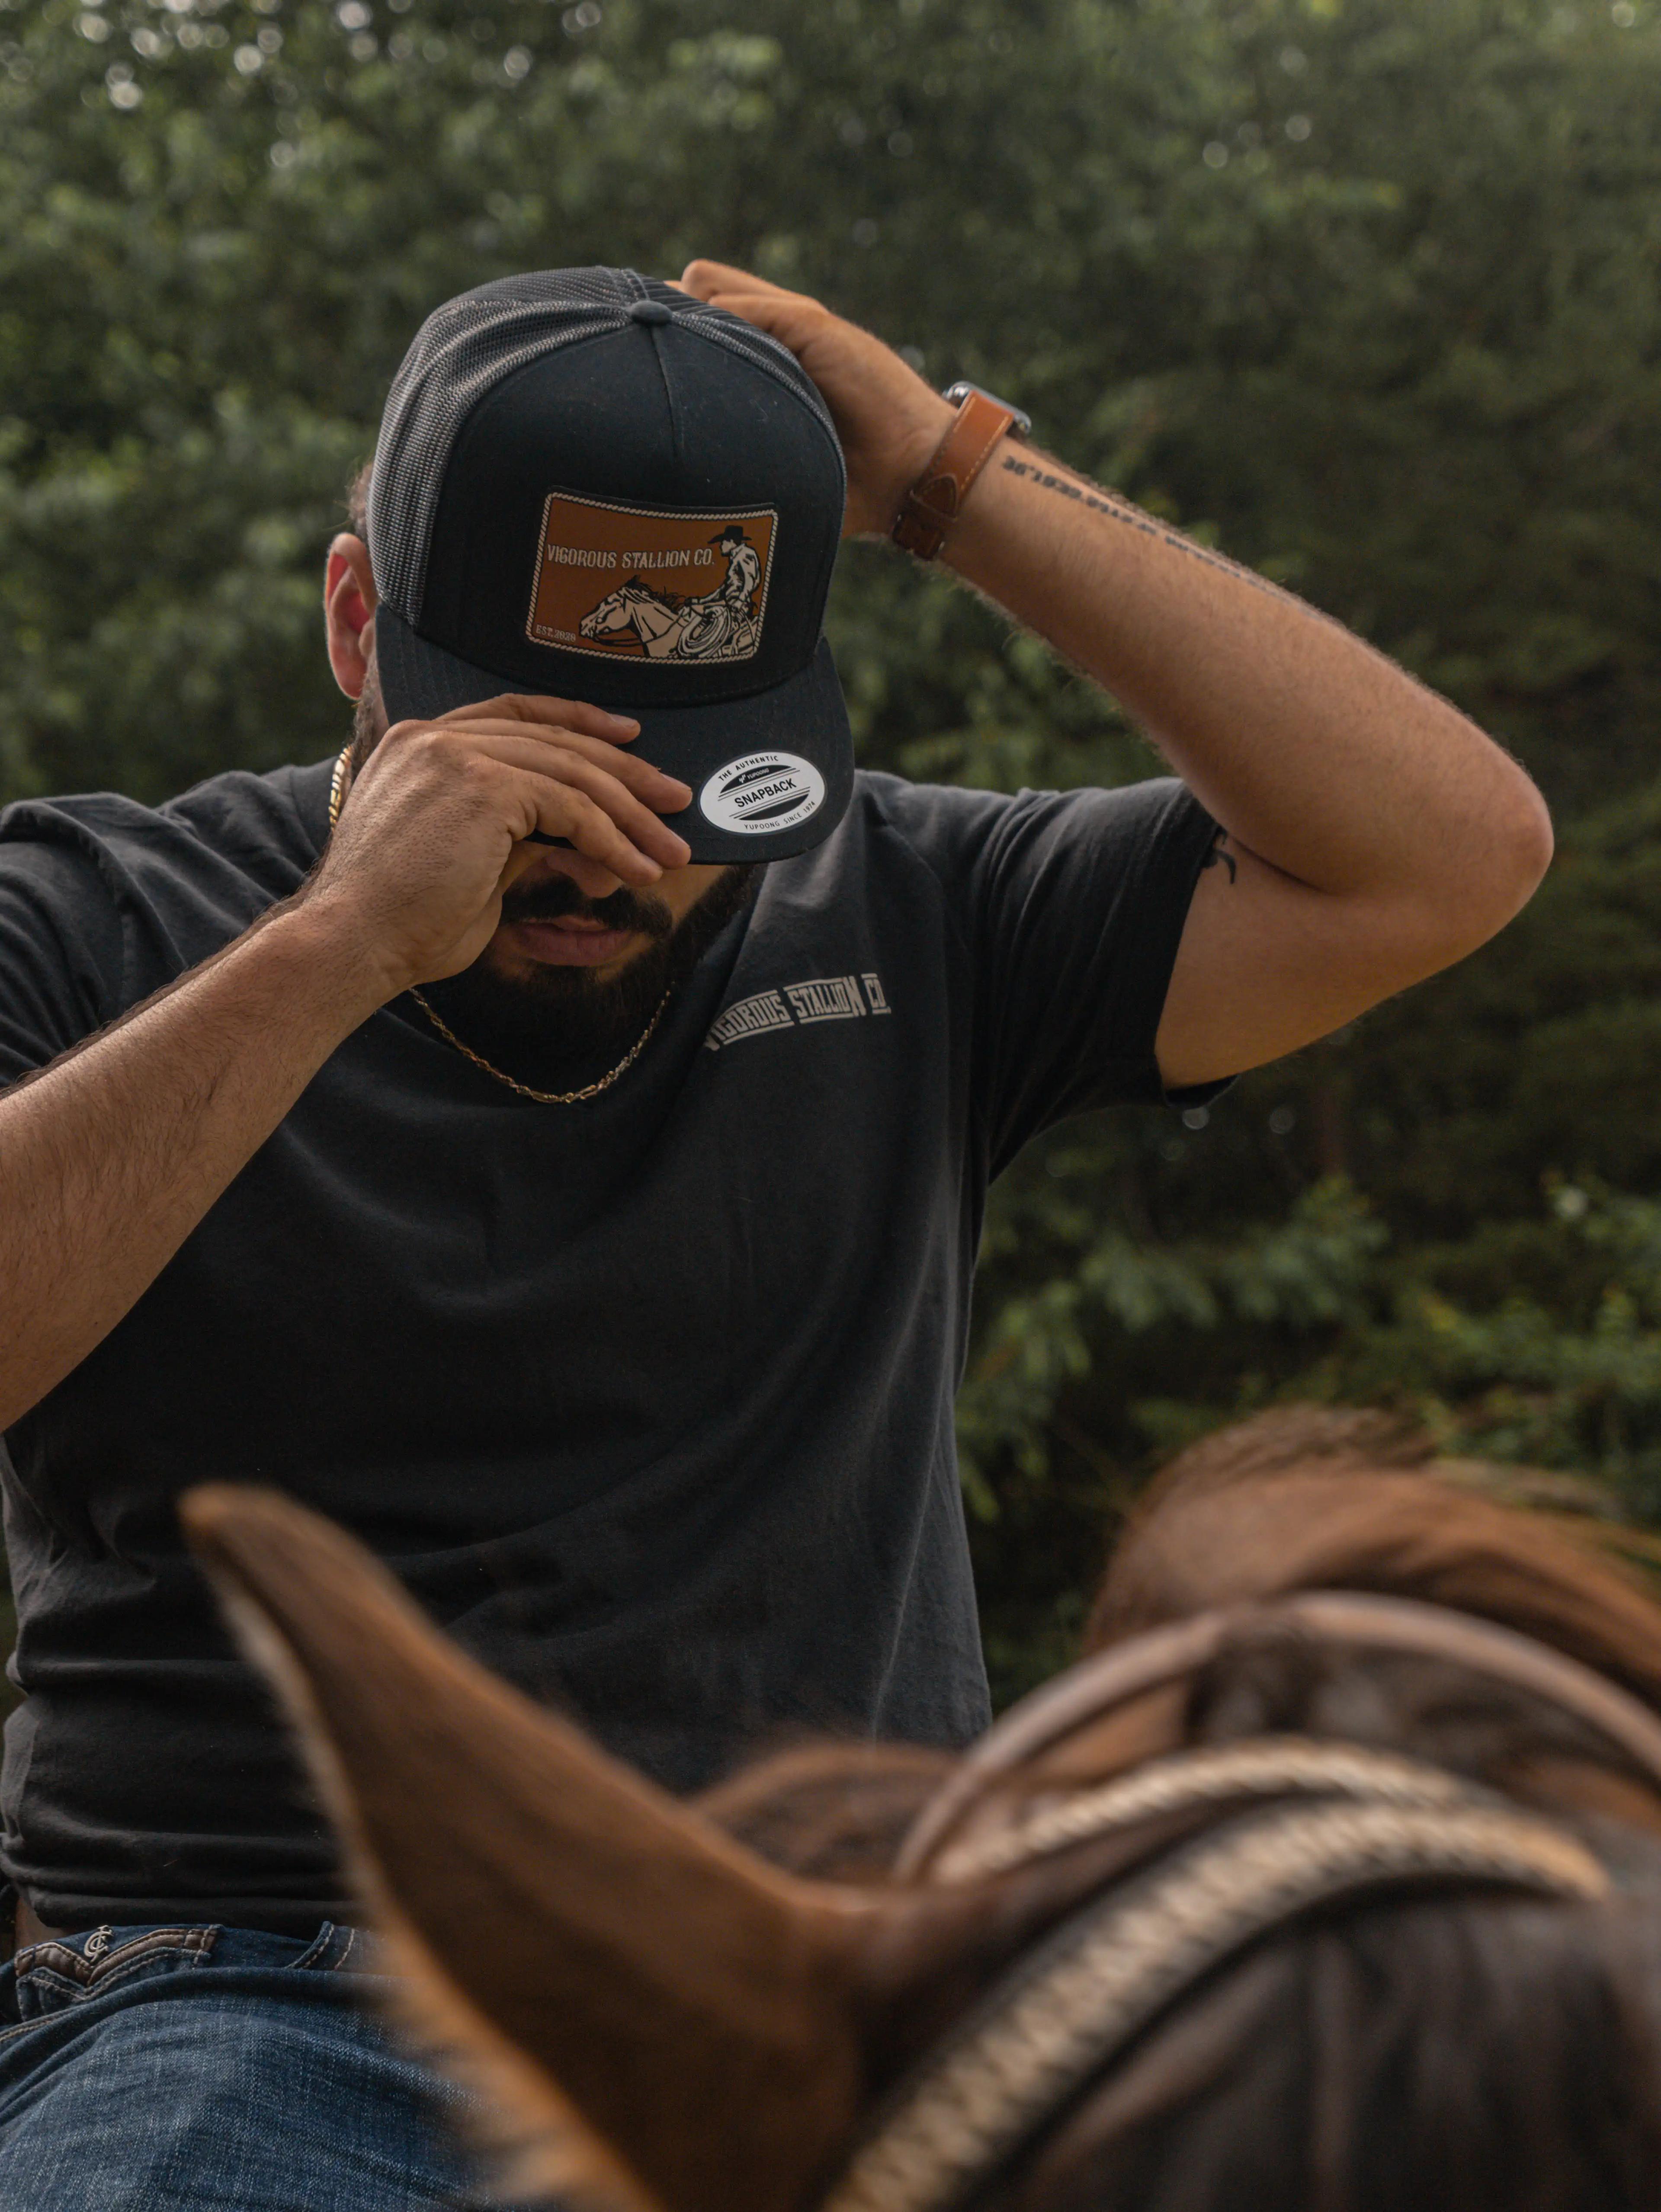 A person on top of a horse adjusting the snapback Traveler hat wearing the Black Stallion shirt.